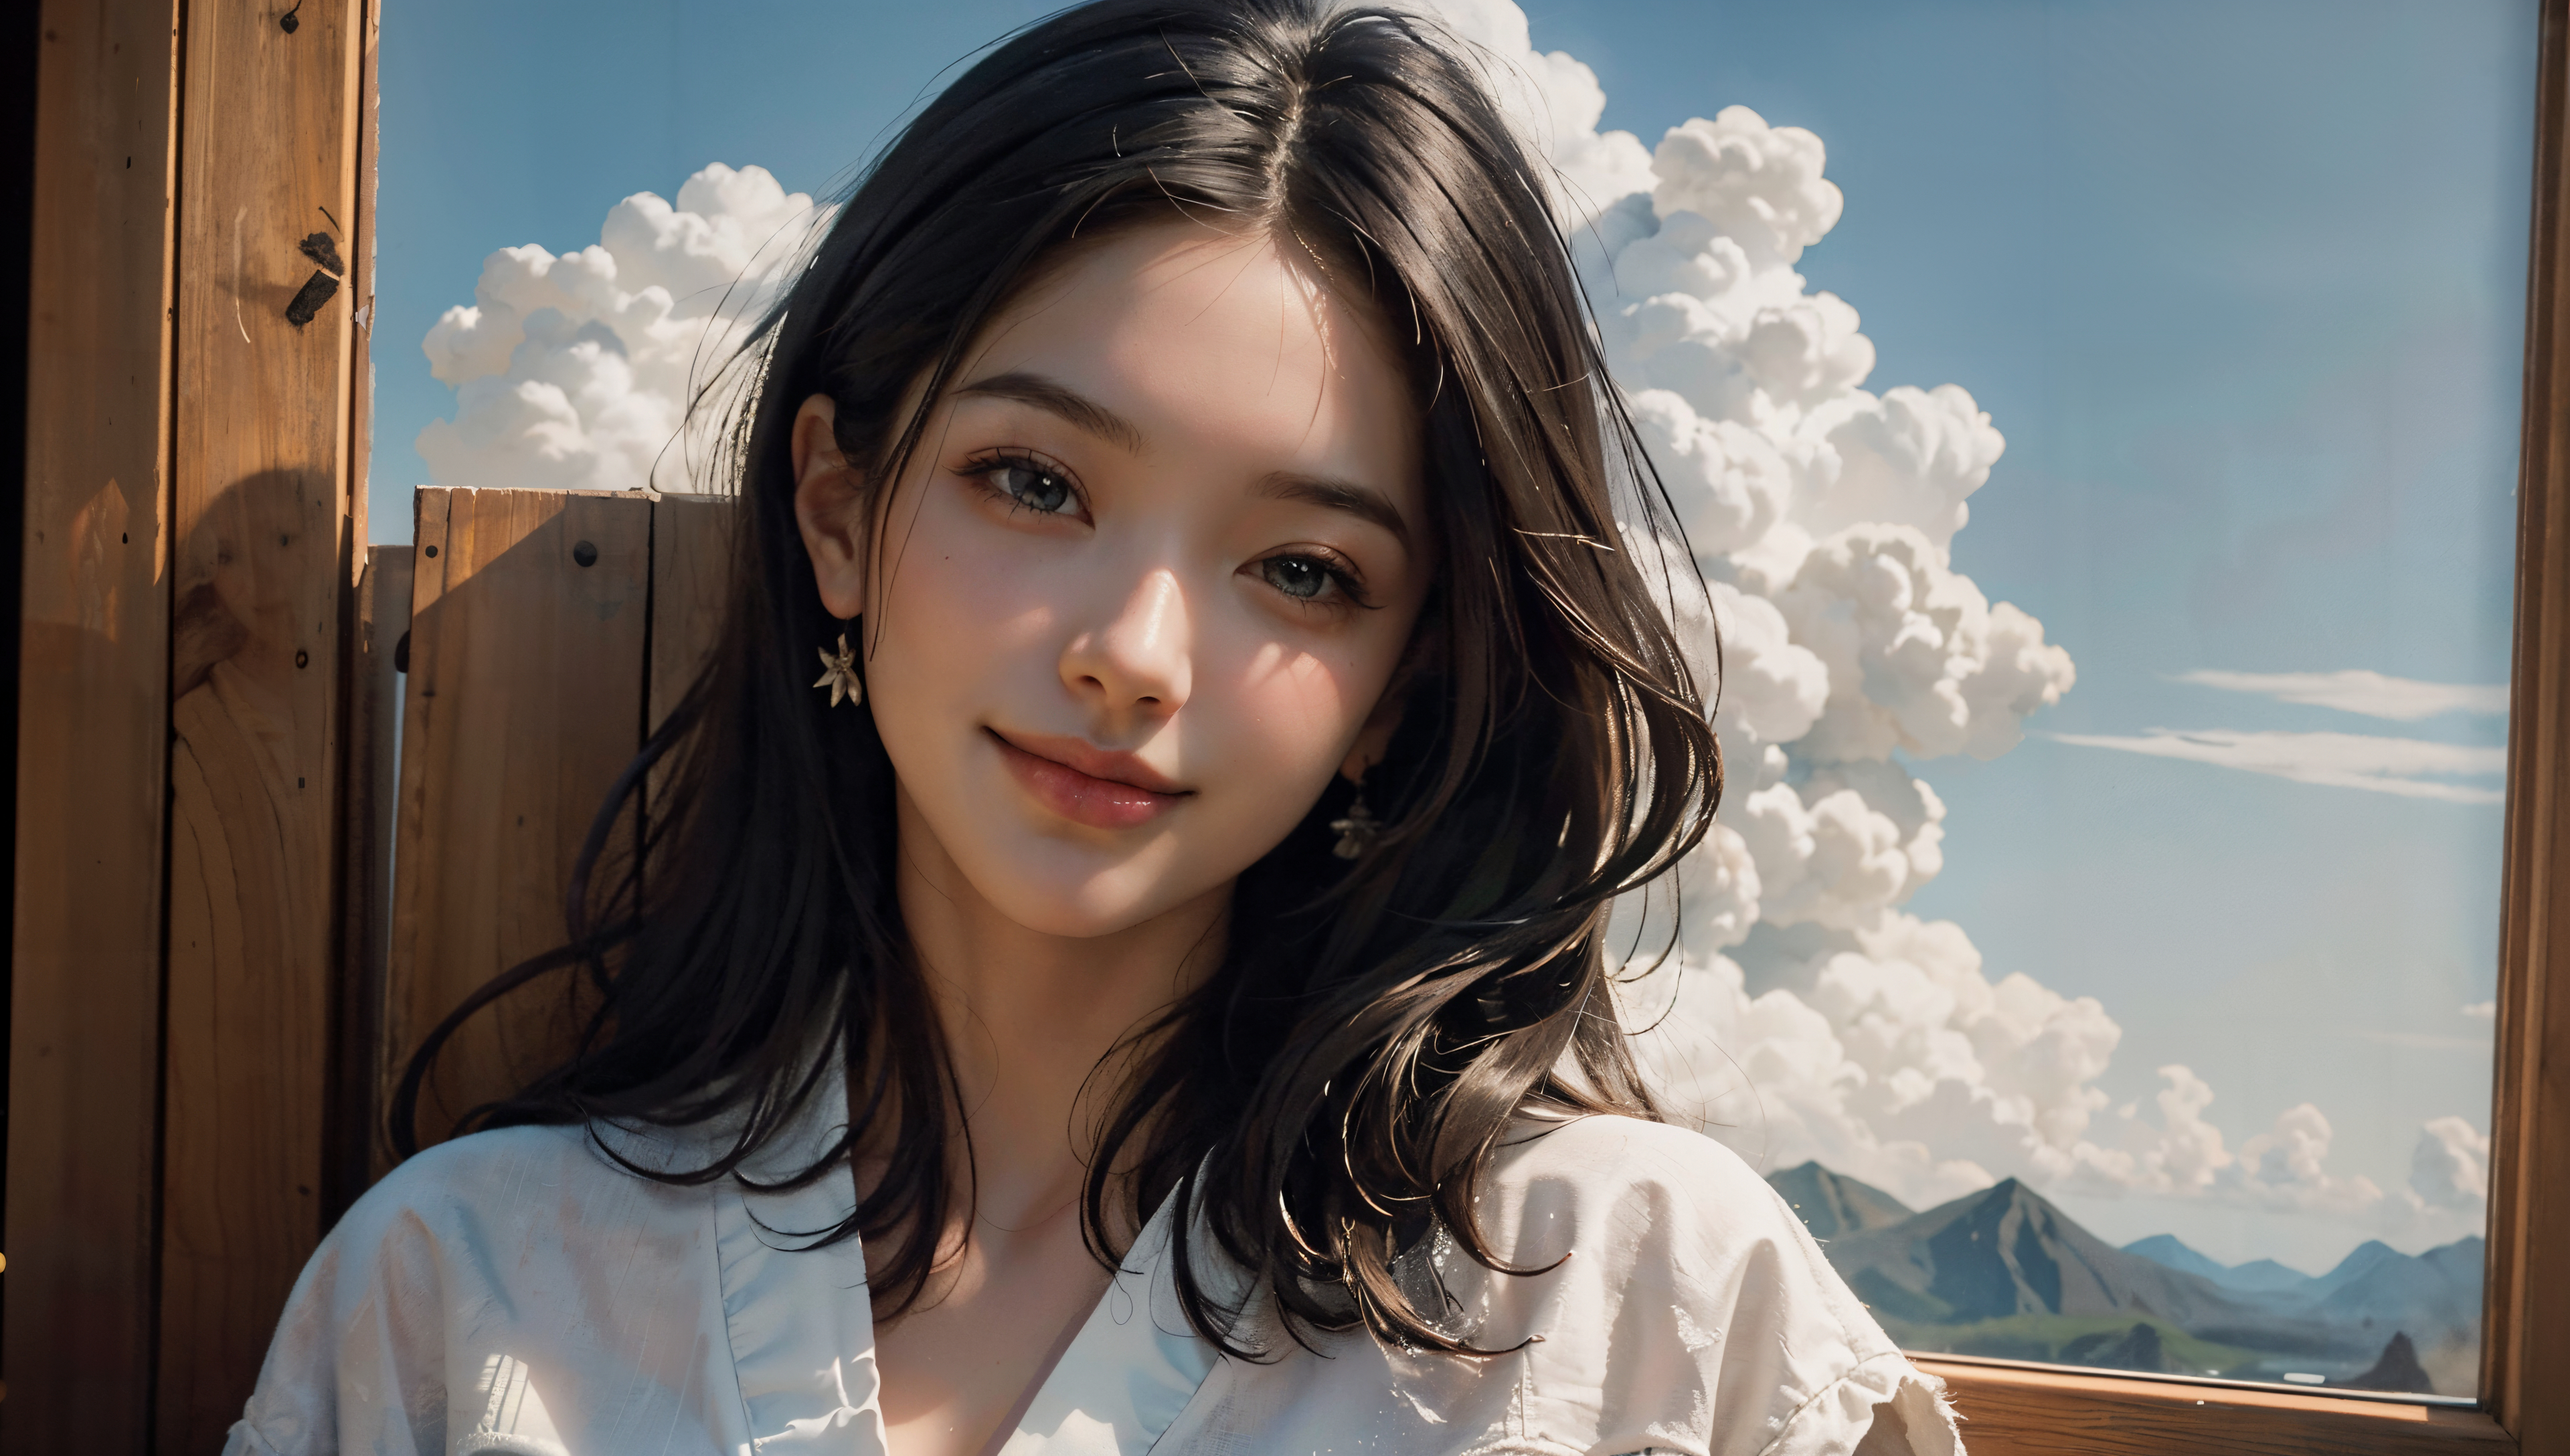 General 3840x2176 AI art women smiling clouds dark hair Asian looking at viewer sky earring mountains